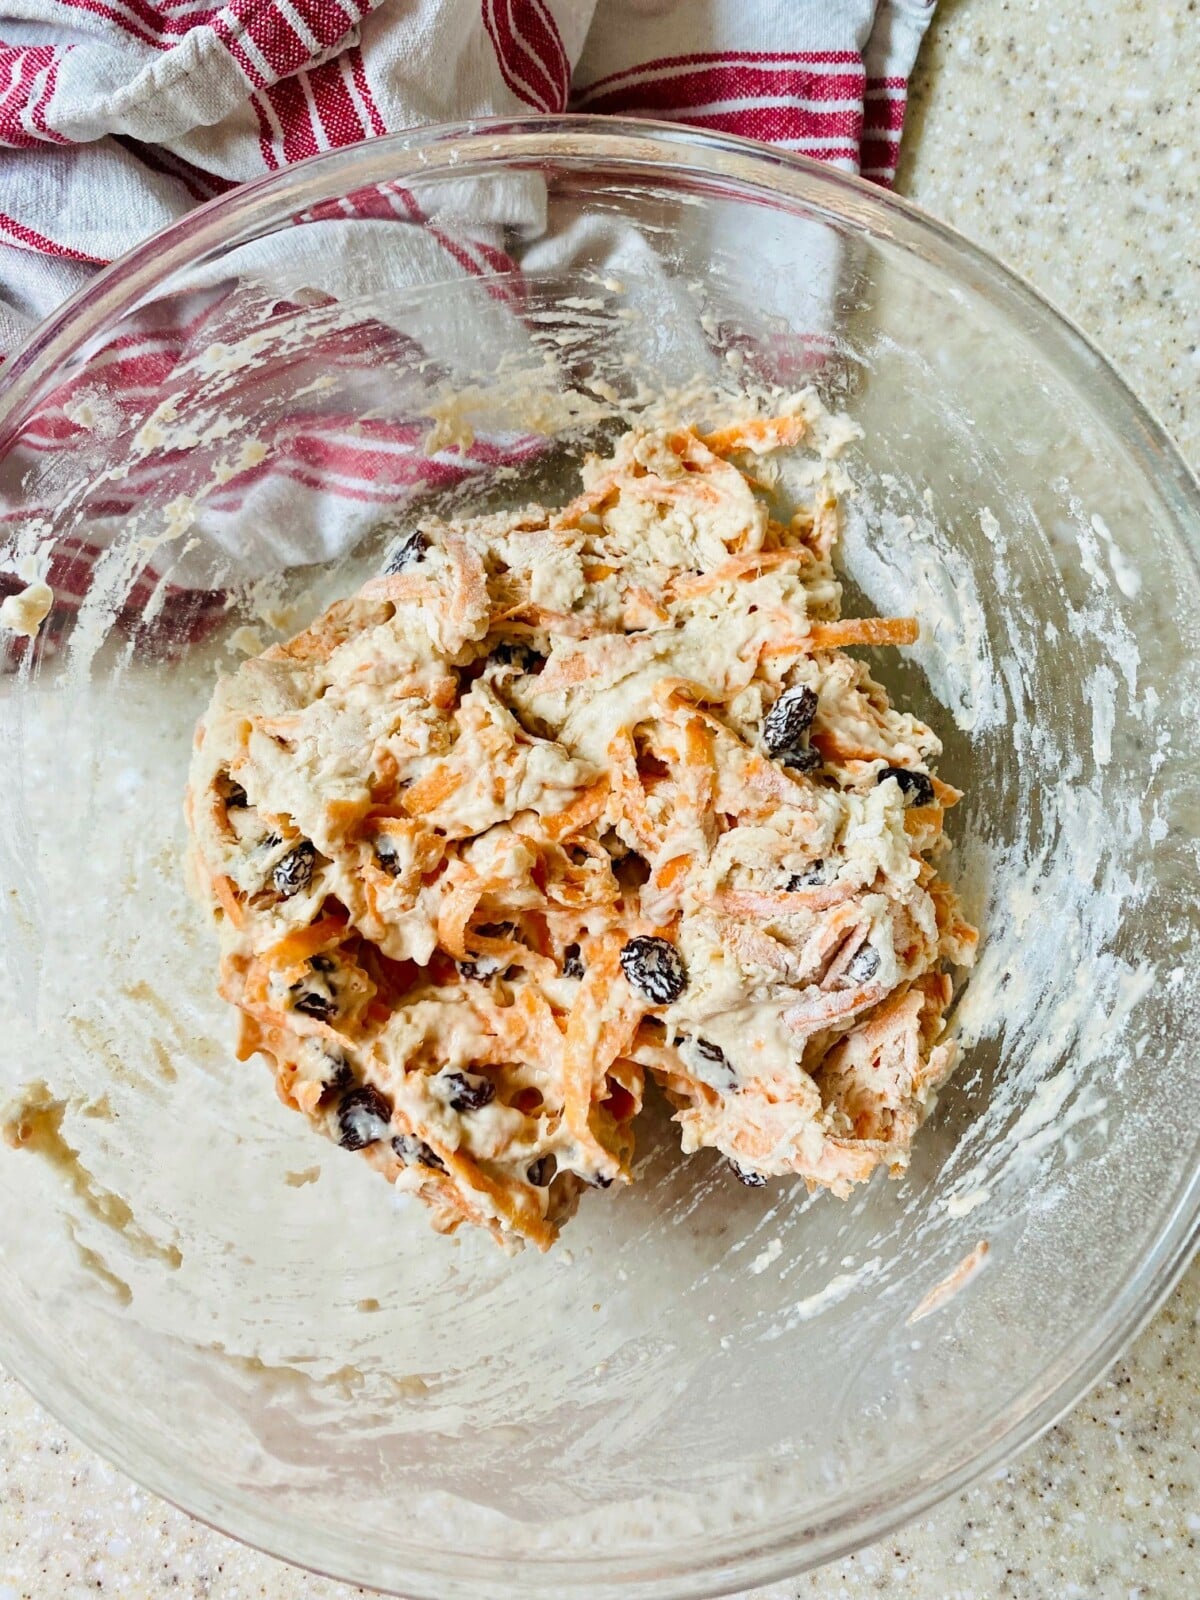 carrot and sultana loaf - ingredients mixed with water